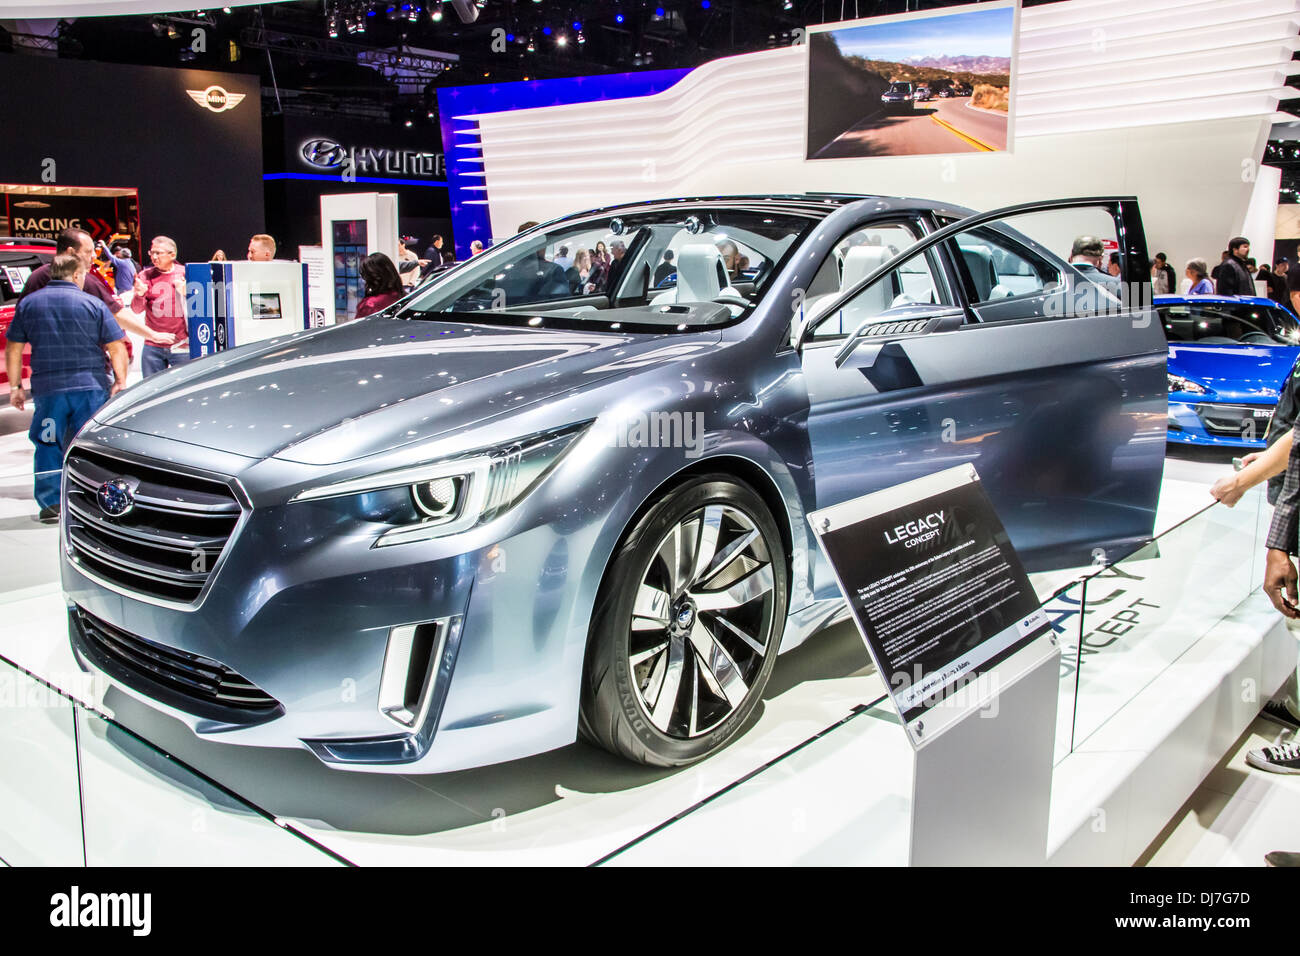 The Subaru Legacy concept car at the 2013 Los Angeles International Auto Show Stock Photo